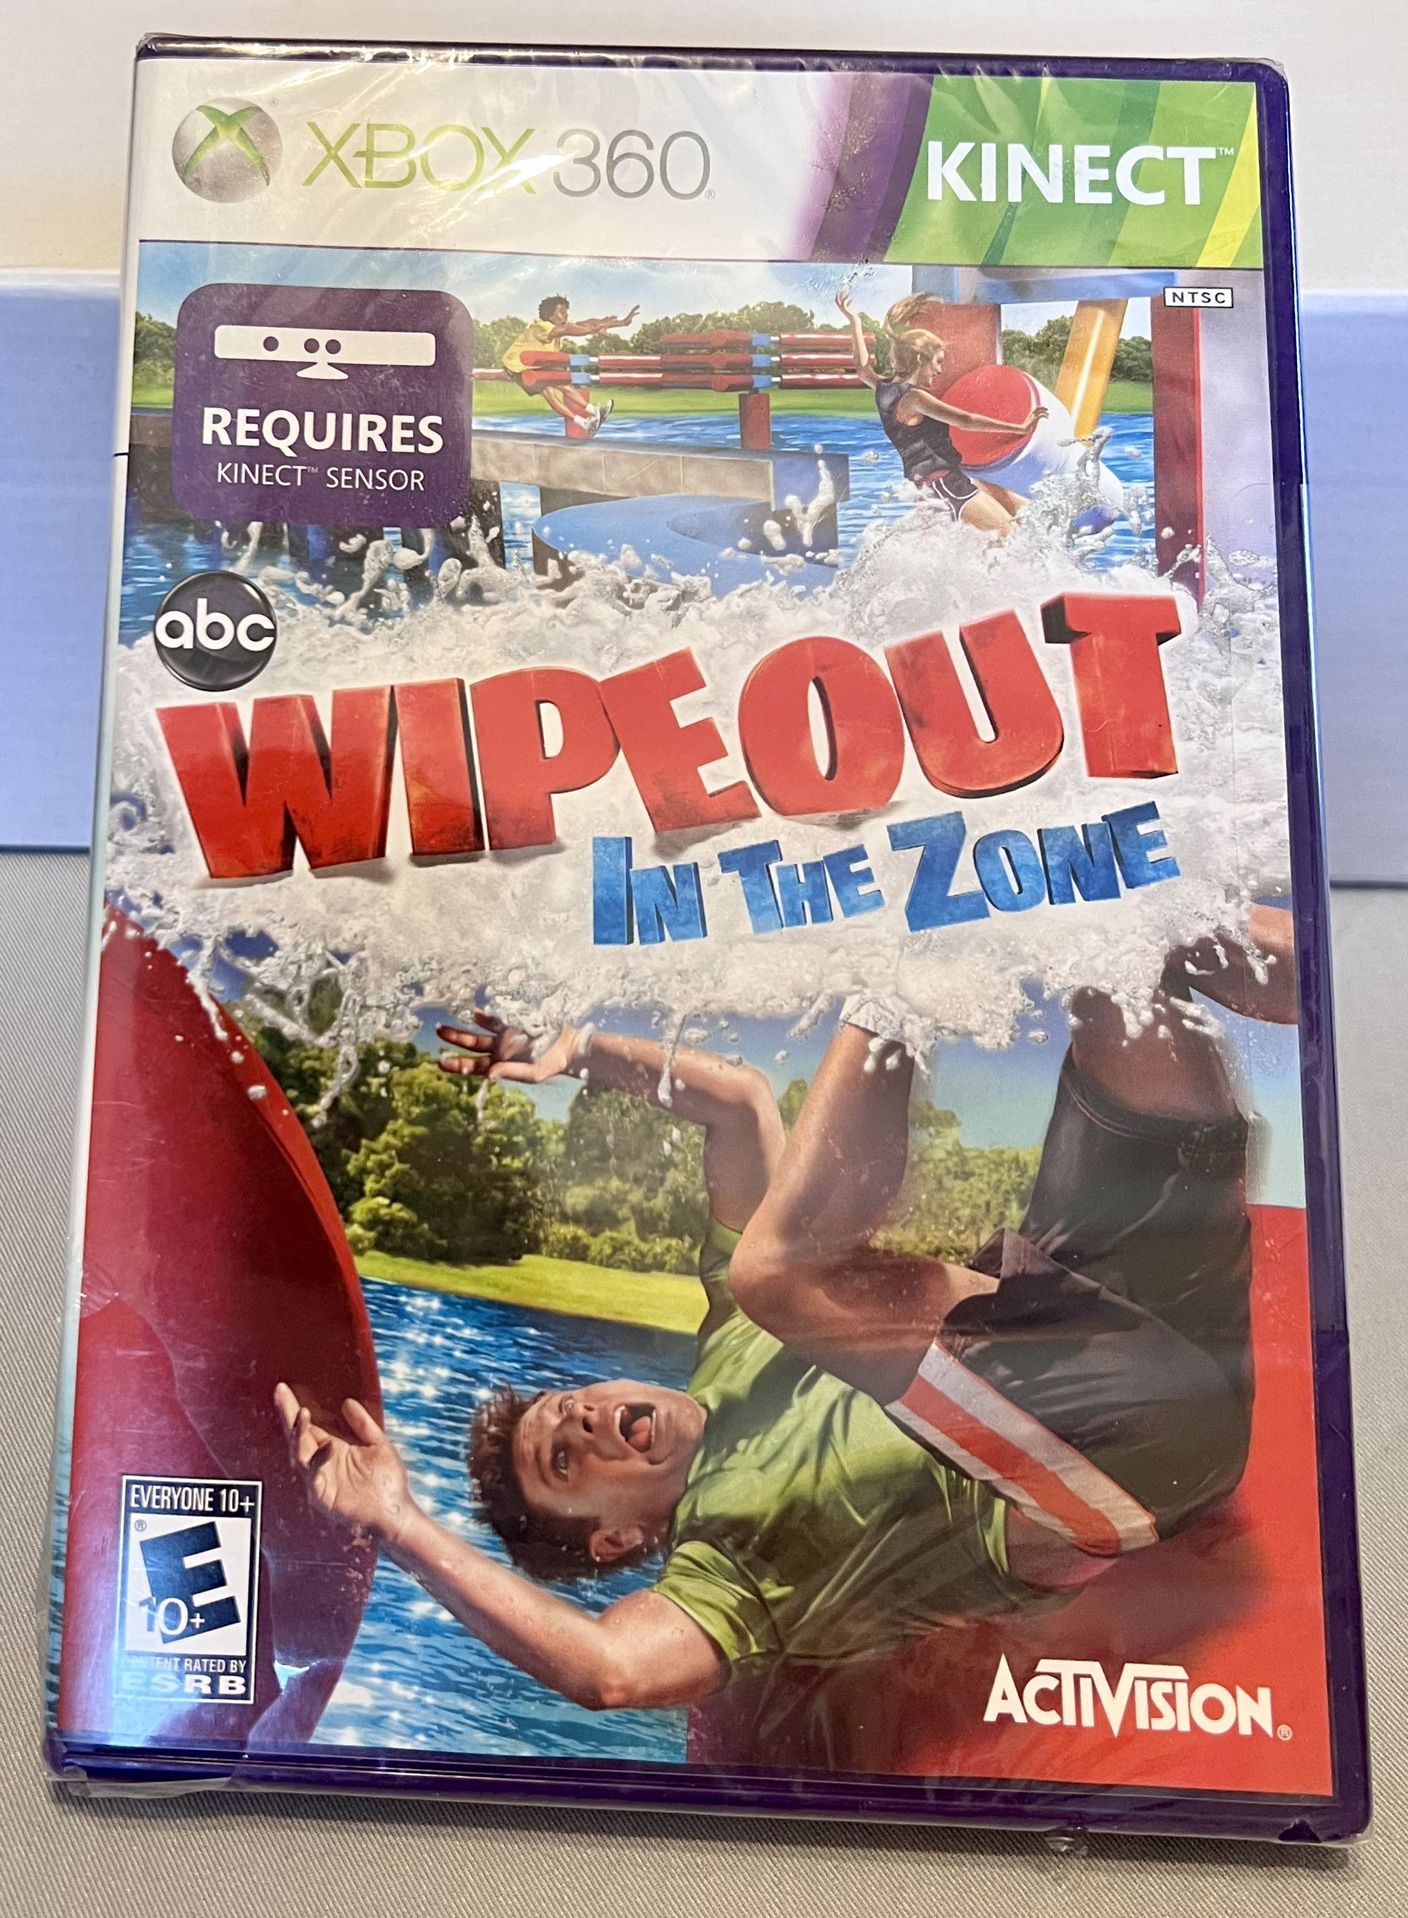 XBOX 360 Wipeout Game - NEW